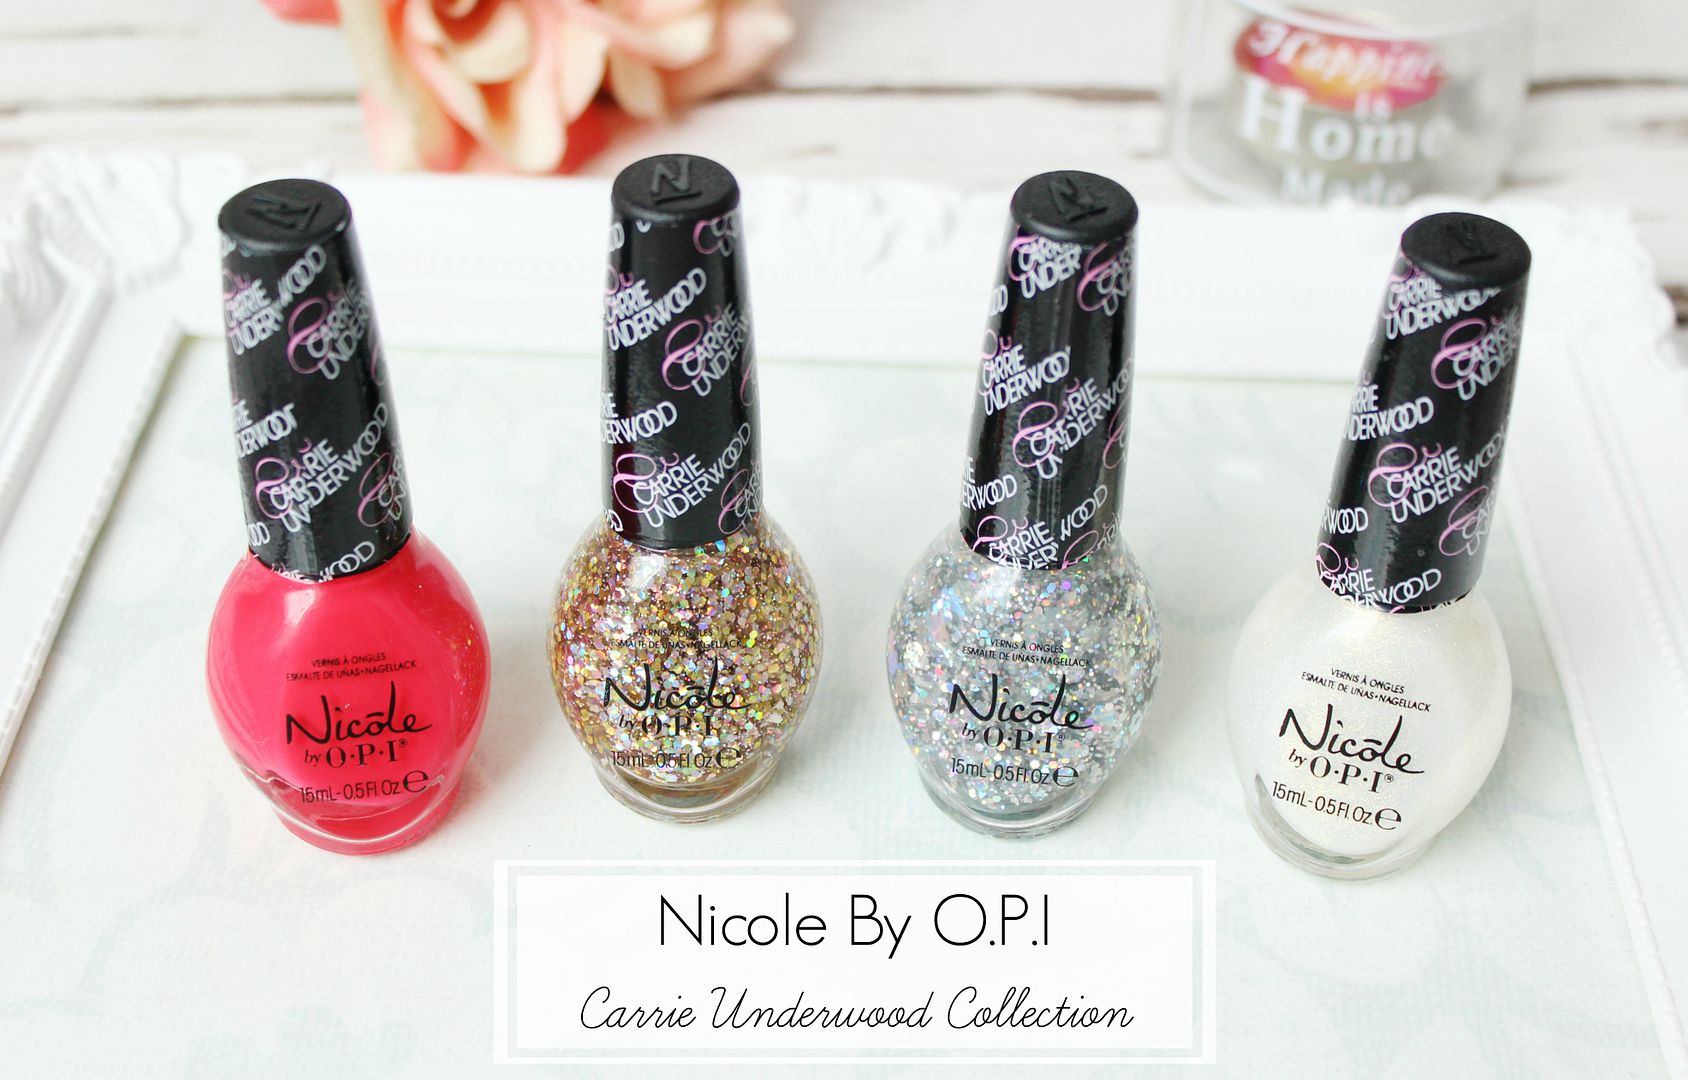 Nicole-By-OPI-Carrie-Underwood-Collection-Lips-Are-Dripping-Honey-Sing-You-Like-A-Bee-Some-Hearts-Party-Bus-Review-Belle-Amie-UK-Beauty-Fashion-Lifestyle-Blog